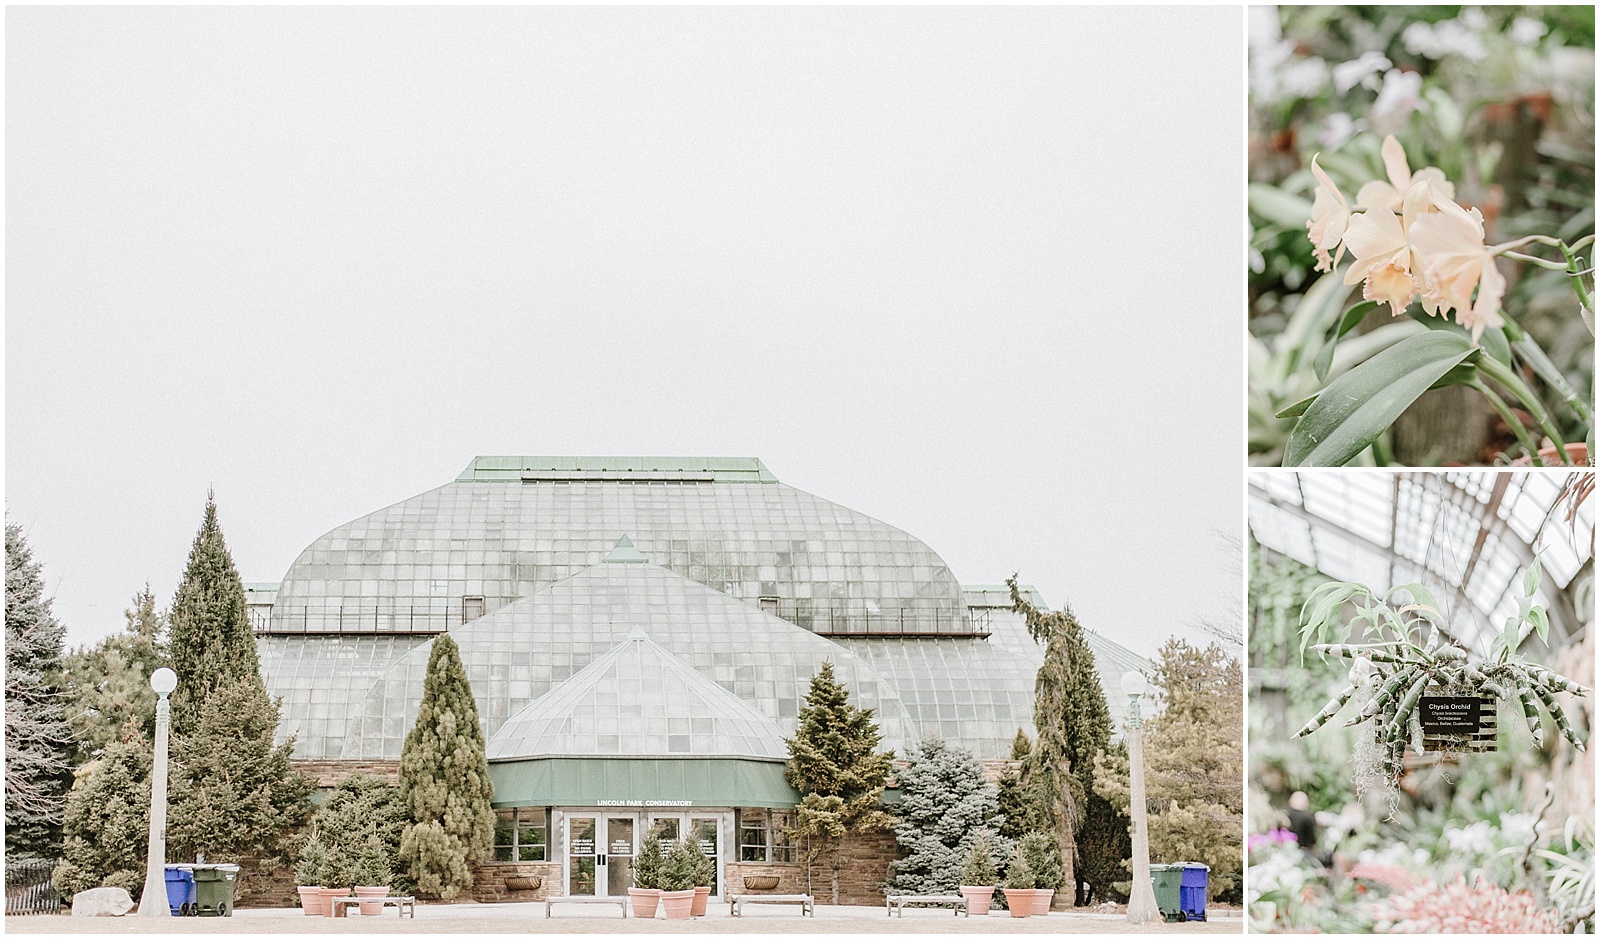 Lincoln Park Conservatory in Chicago, IL